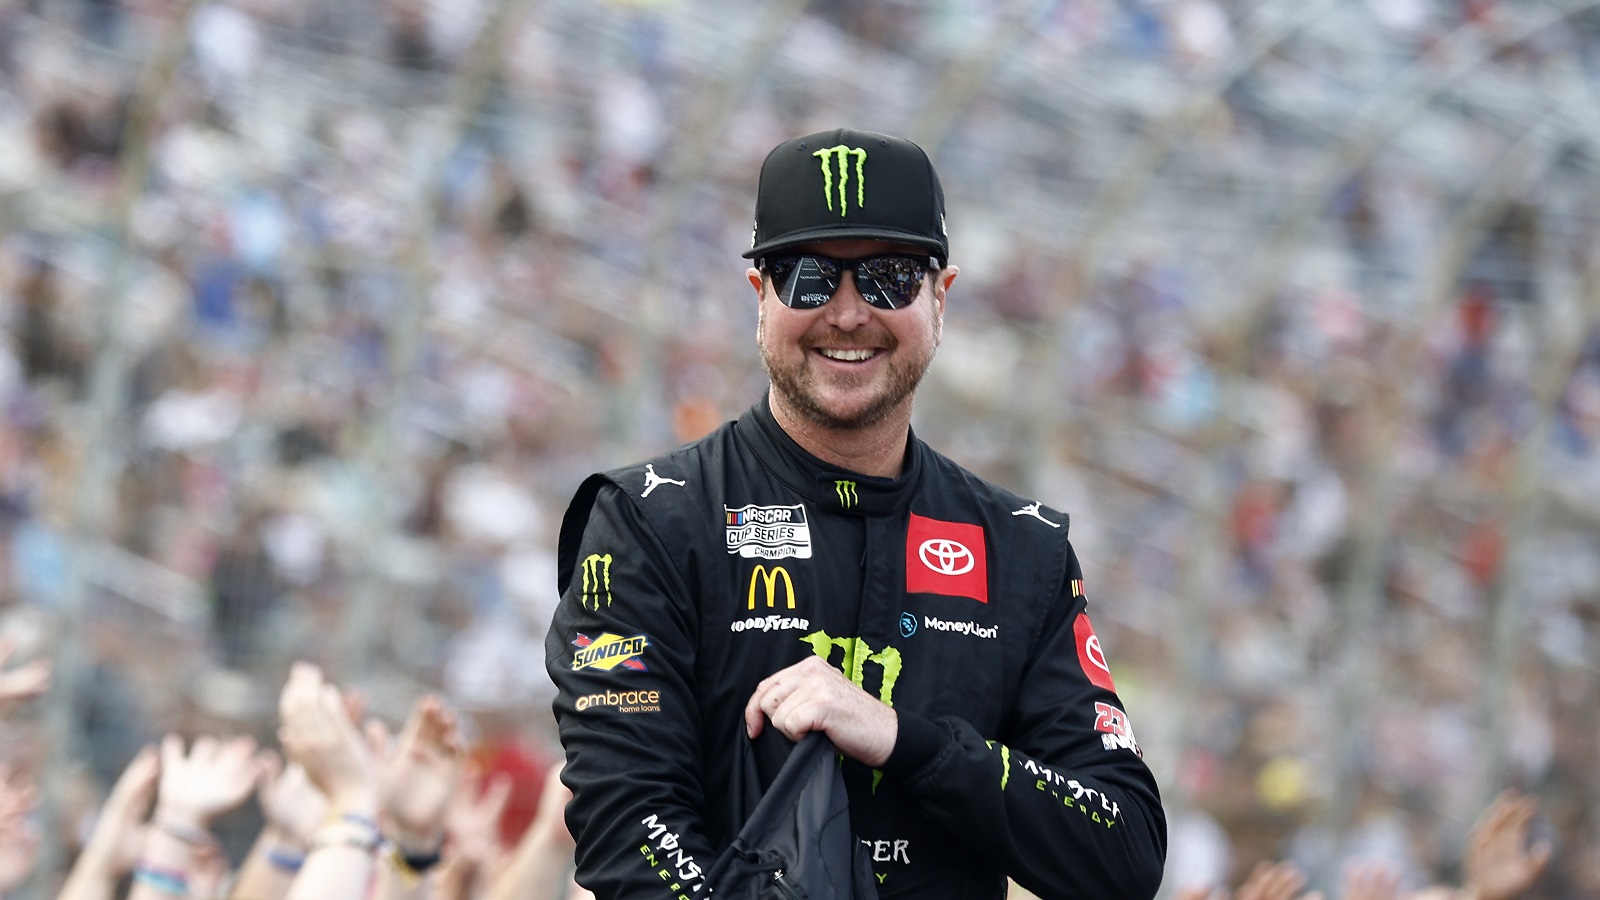 Kurt Busch before the NASCAR Cup Series All-Star Race at Texas Motor Speedway on May 22, 2022. | Jared C. Tilton/Getty Images